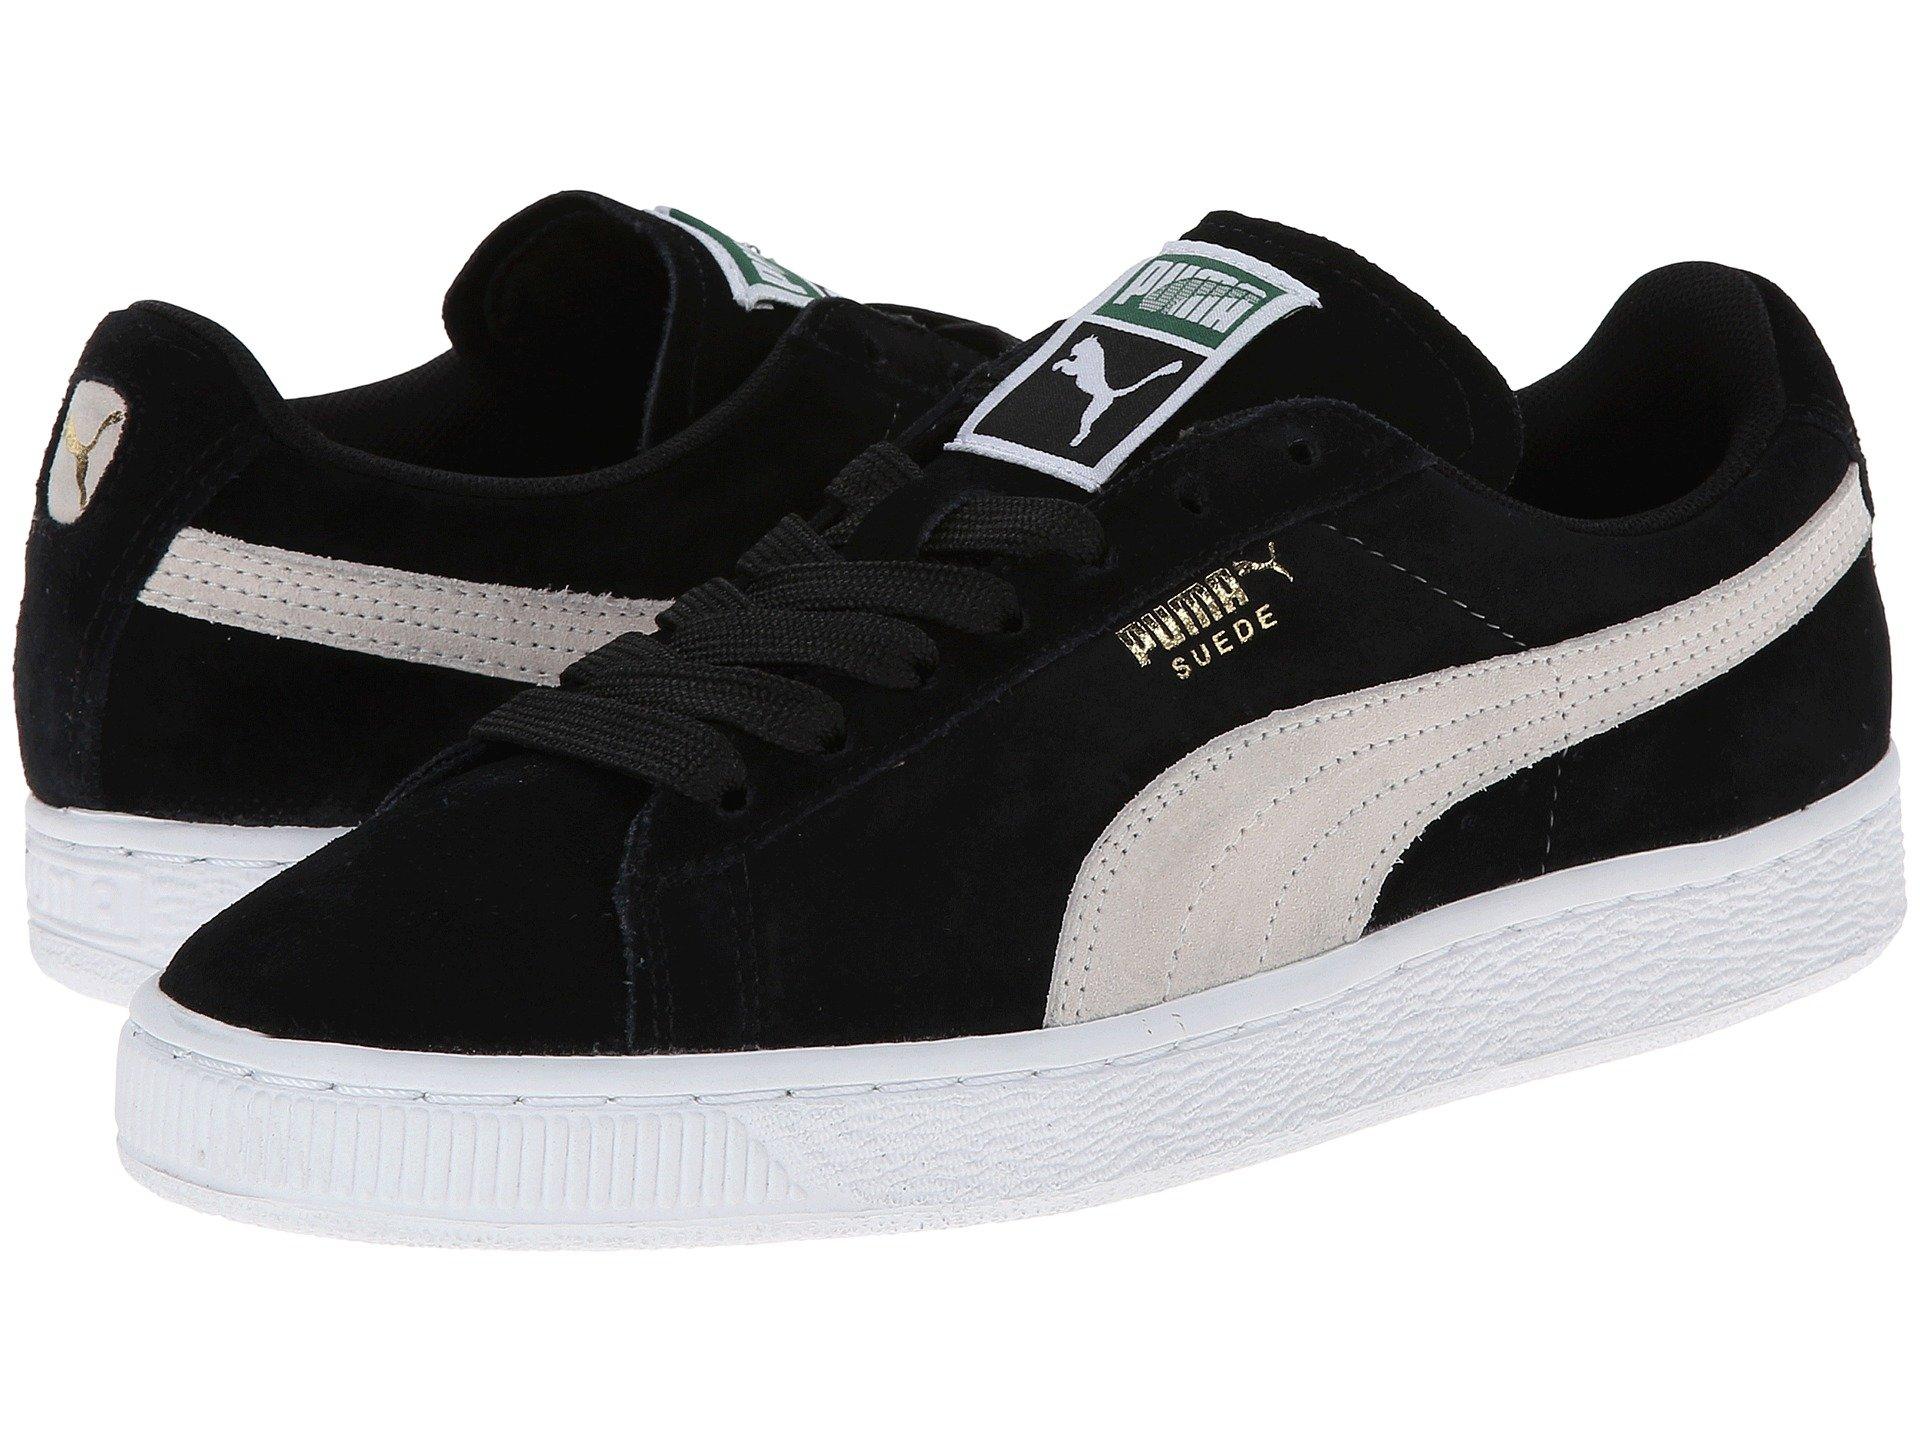  www lyst com shoes puma suede classic wns black product EUFWXEW link id 20240774 country US size 9 5 B Medium show express checkout true atc medium cpc